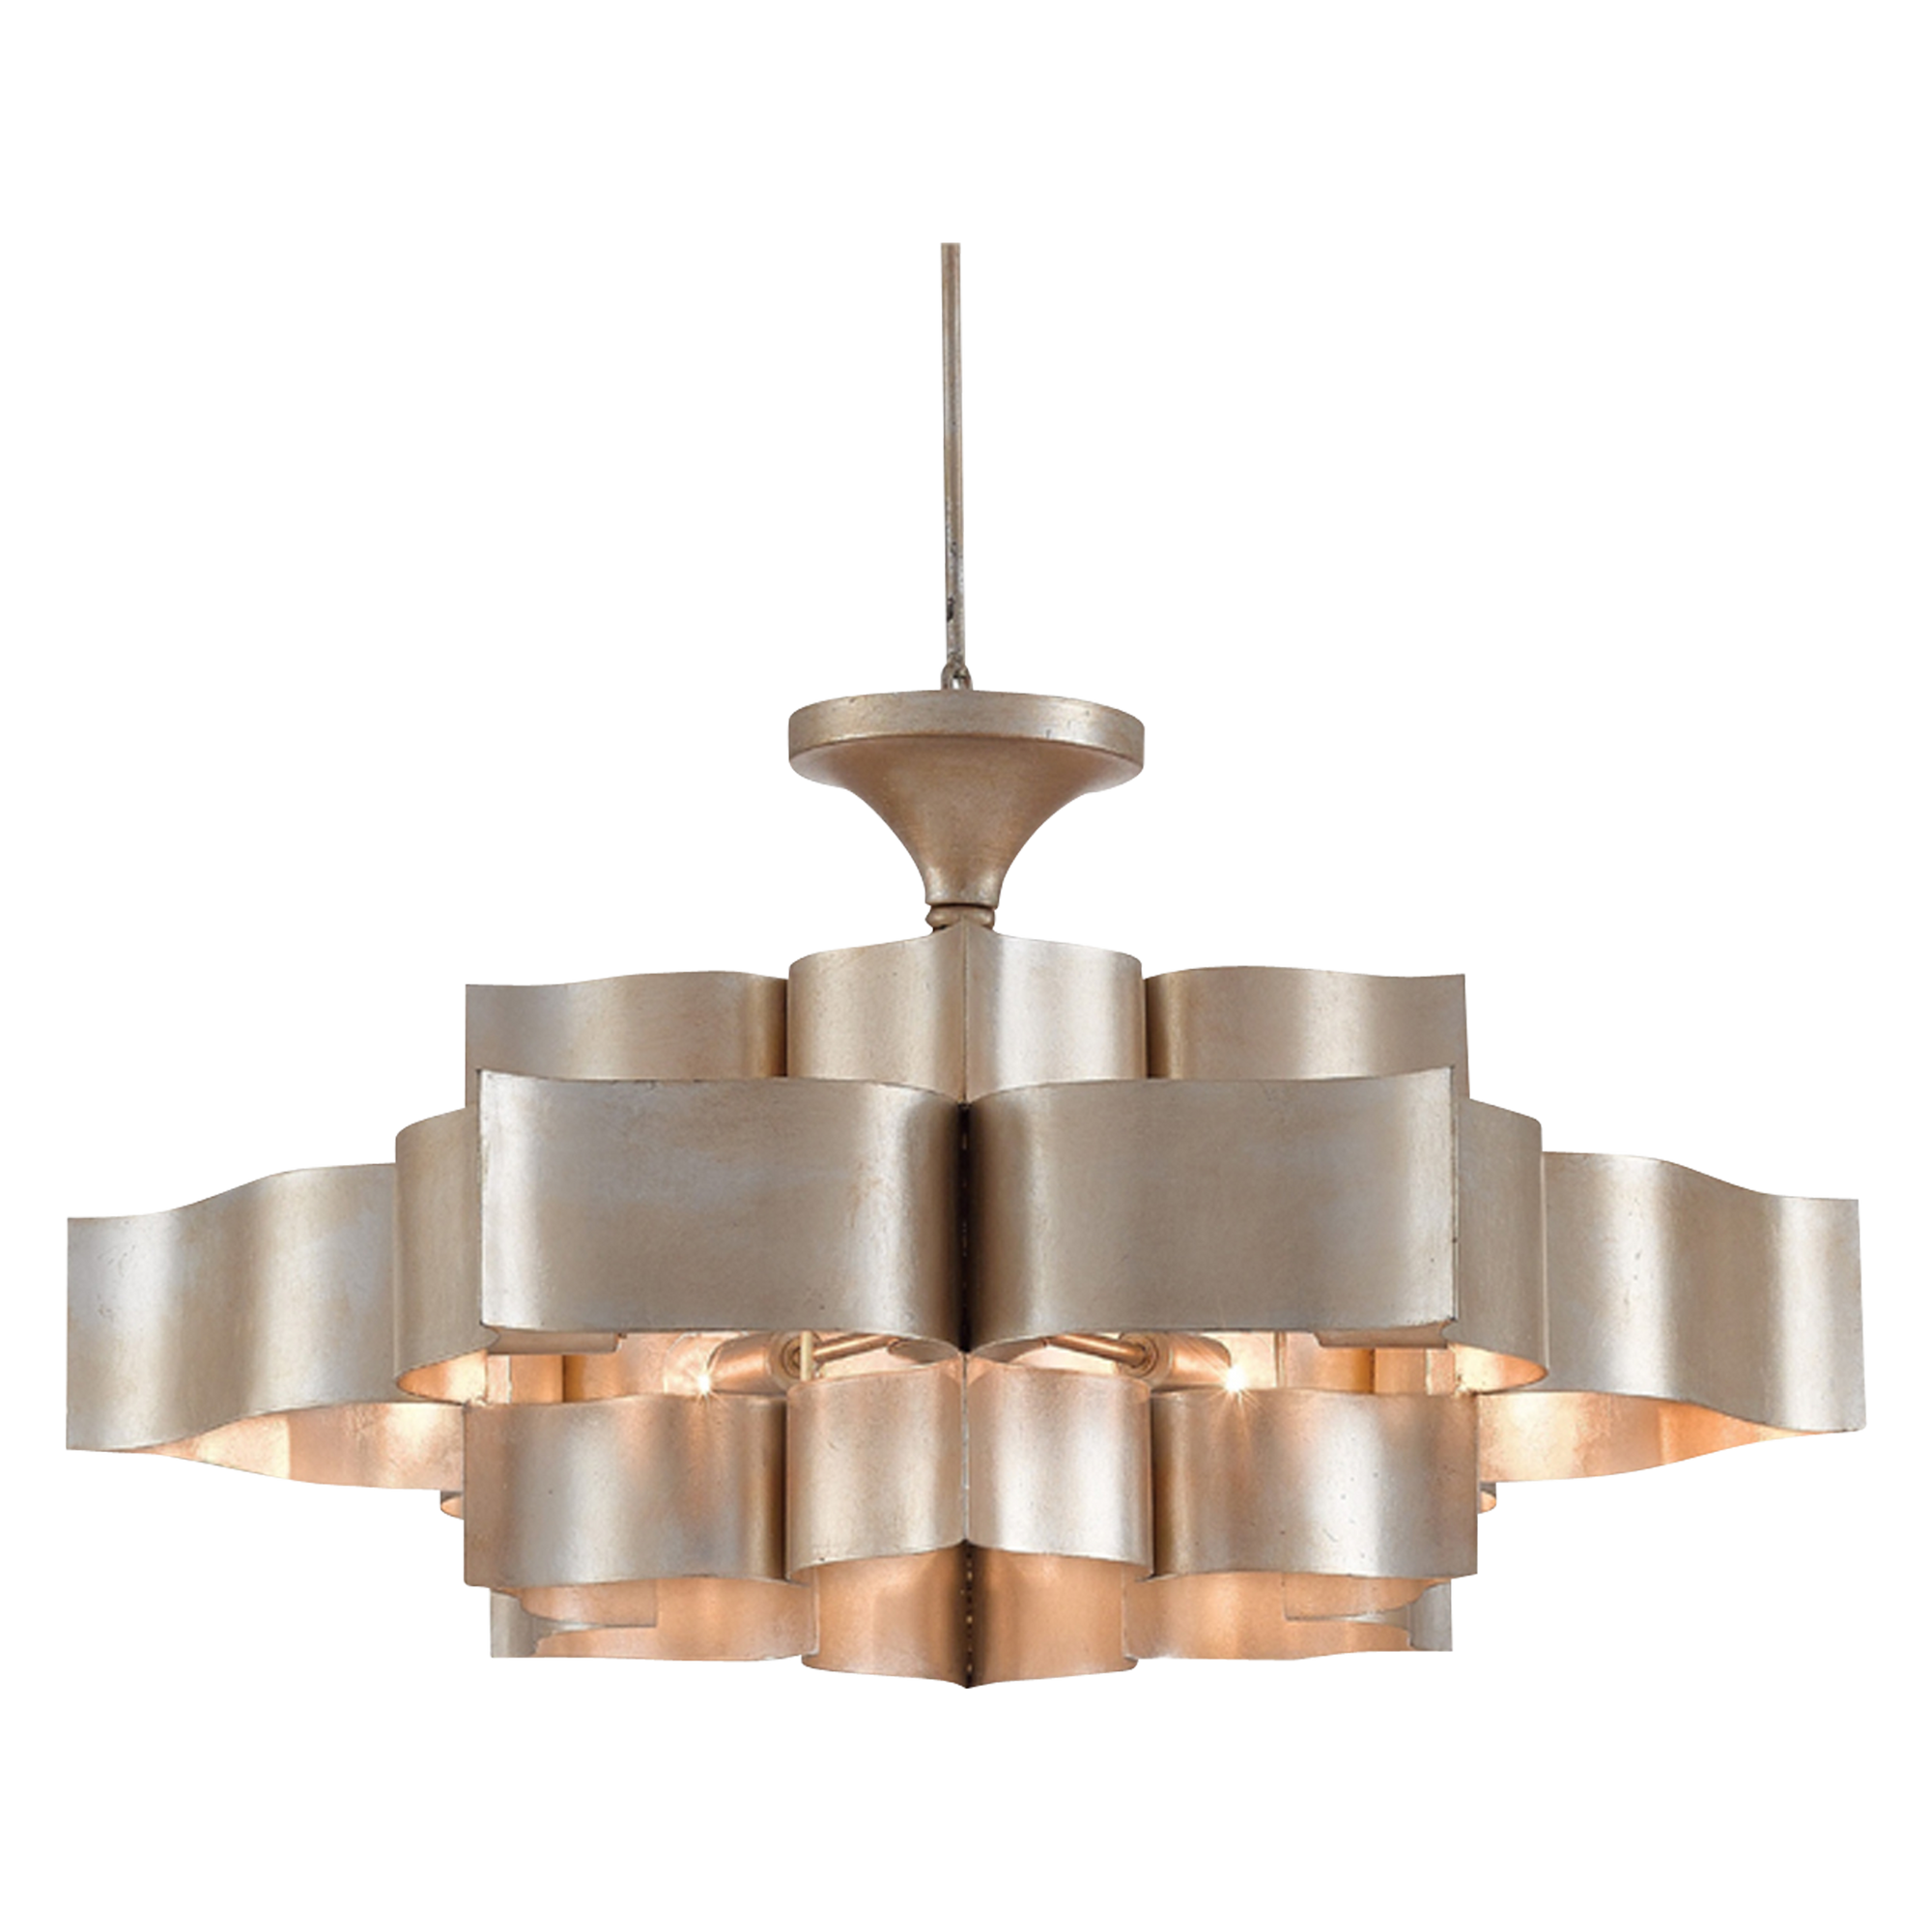 The Lotus Blossom chandelier highlights stunning workmanship in its design.